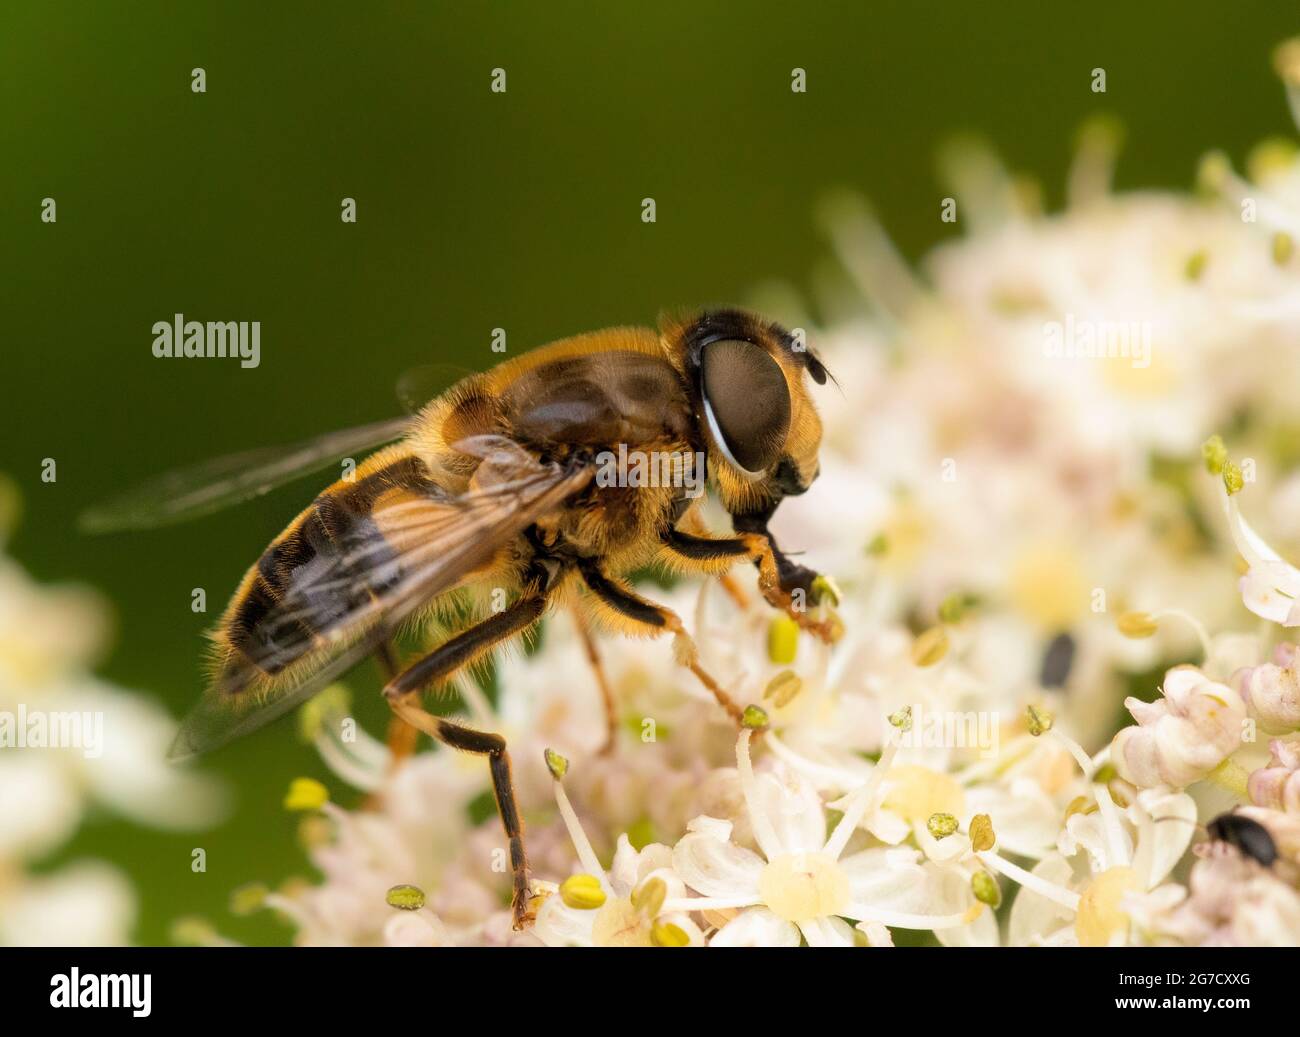 Eristalis tenax, common drone fly, hoverfly, on cow parsley in a British Meadow Stock Photo